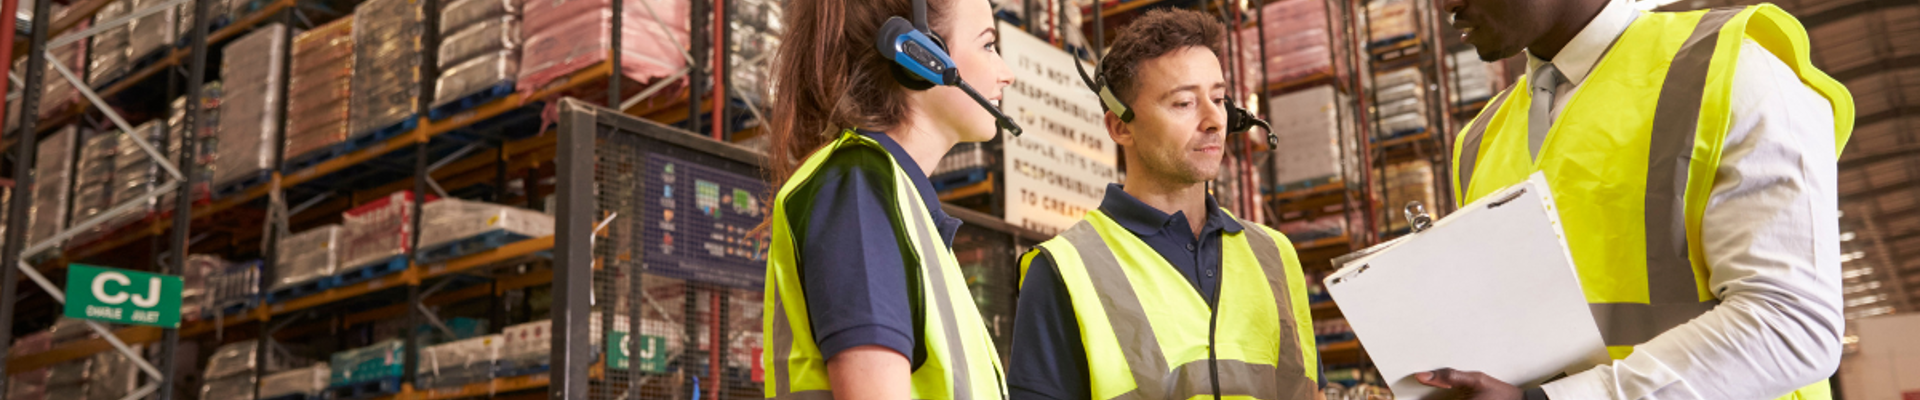 Streamline workforce management with our new T2 clocking terminal  